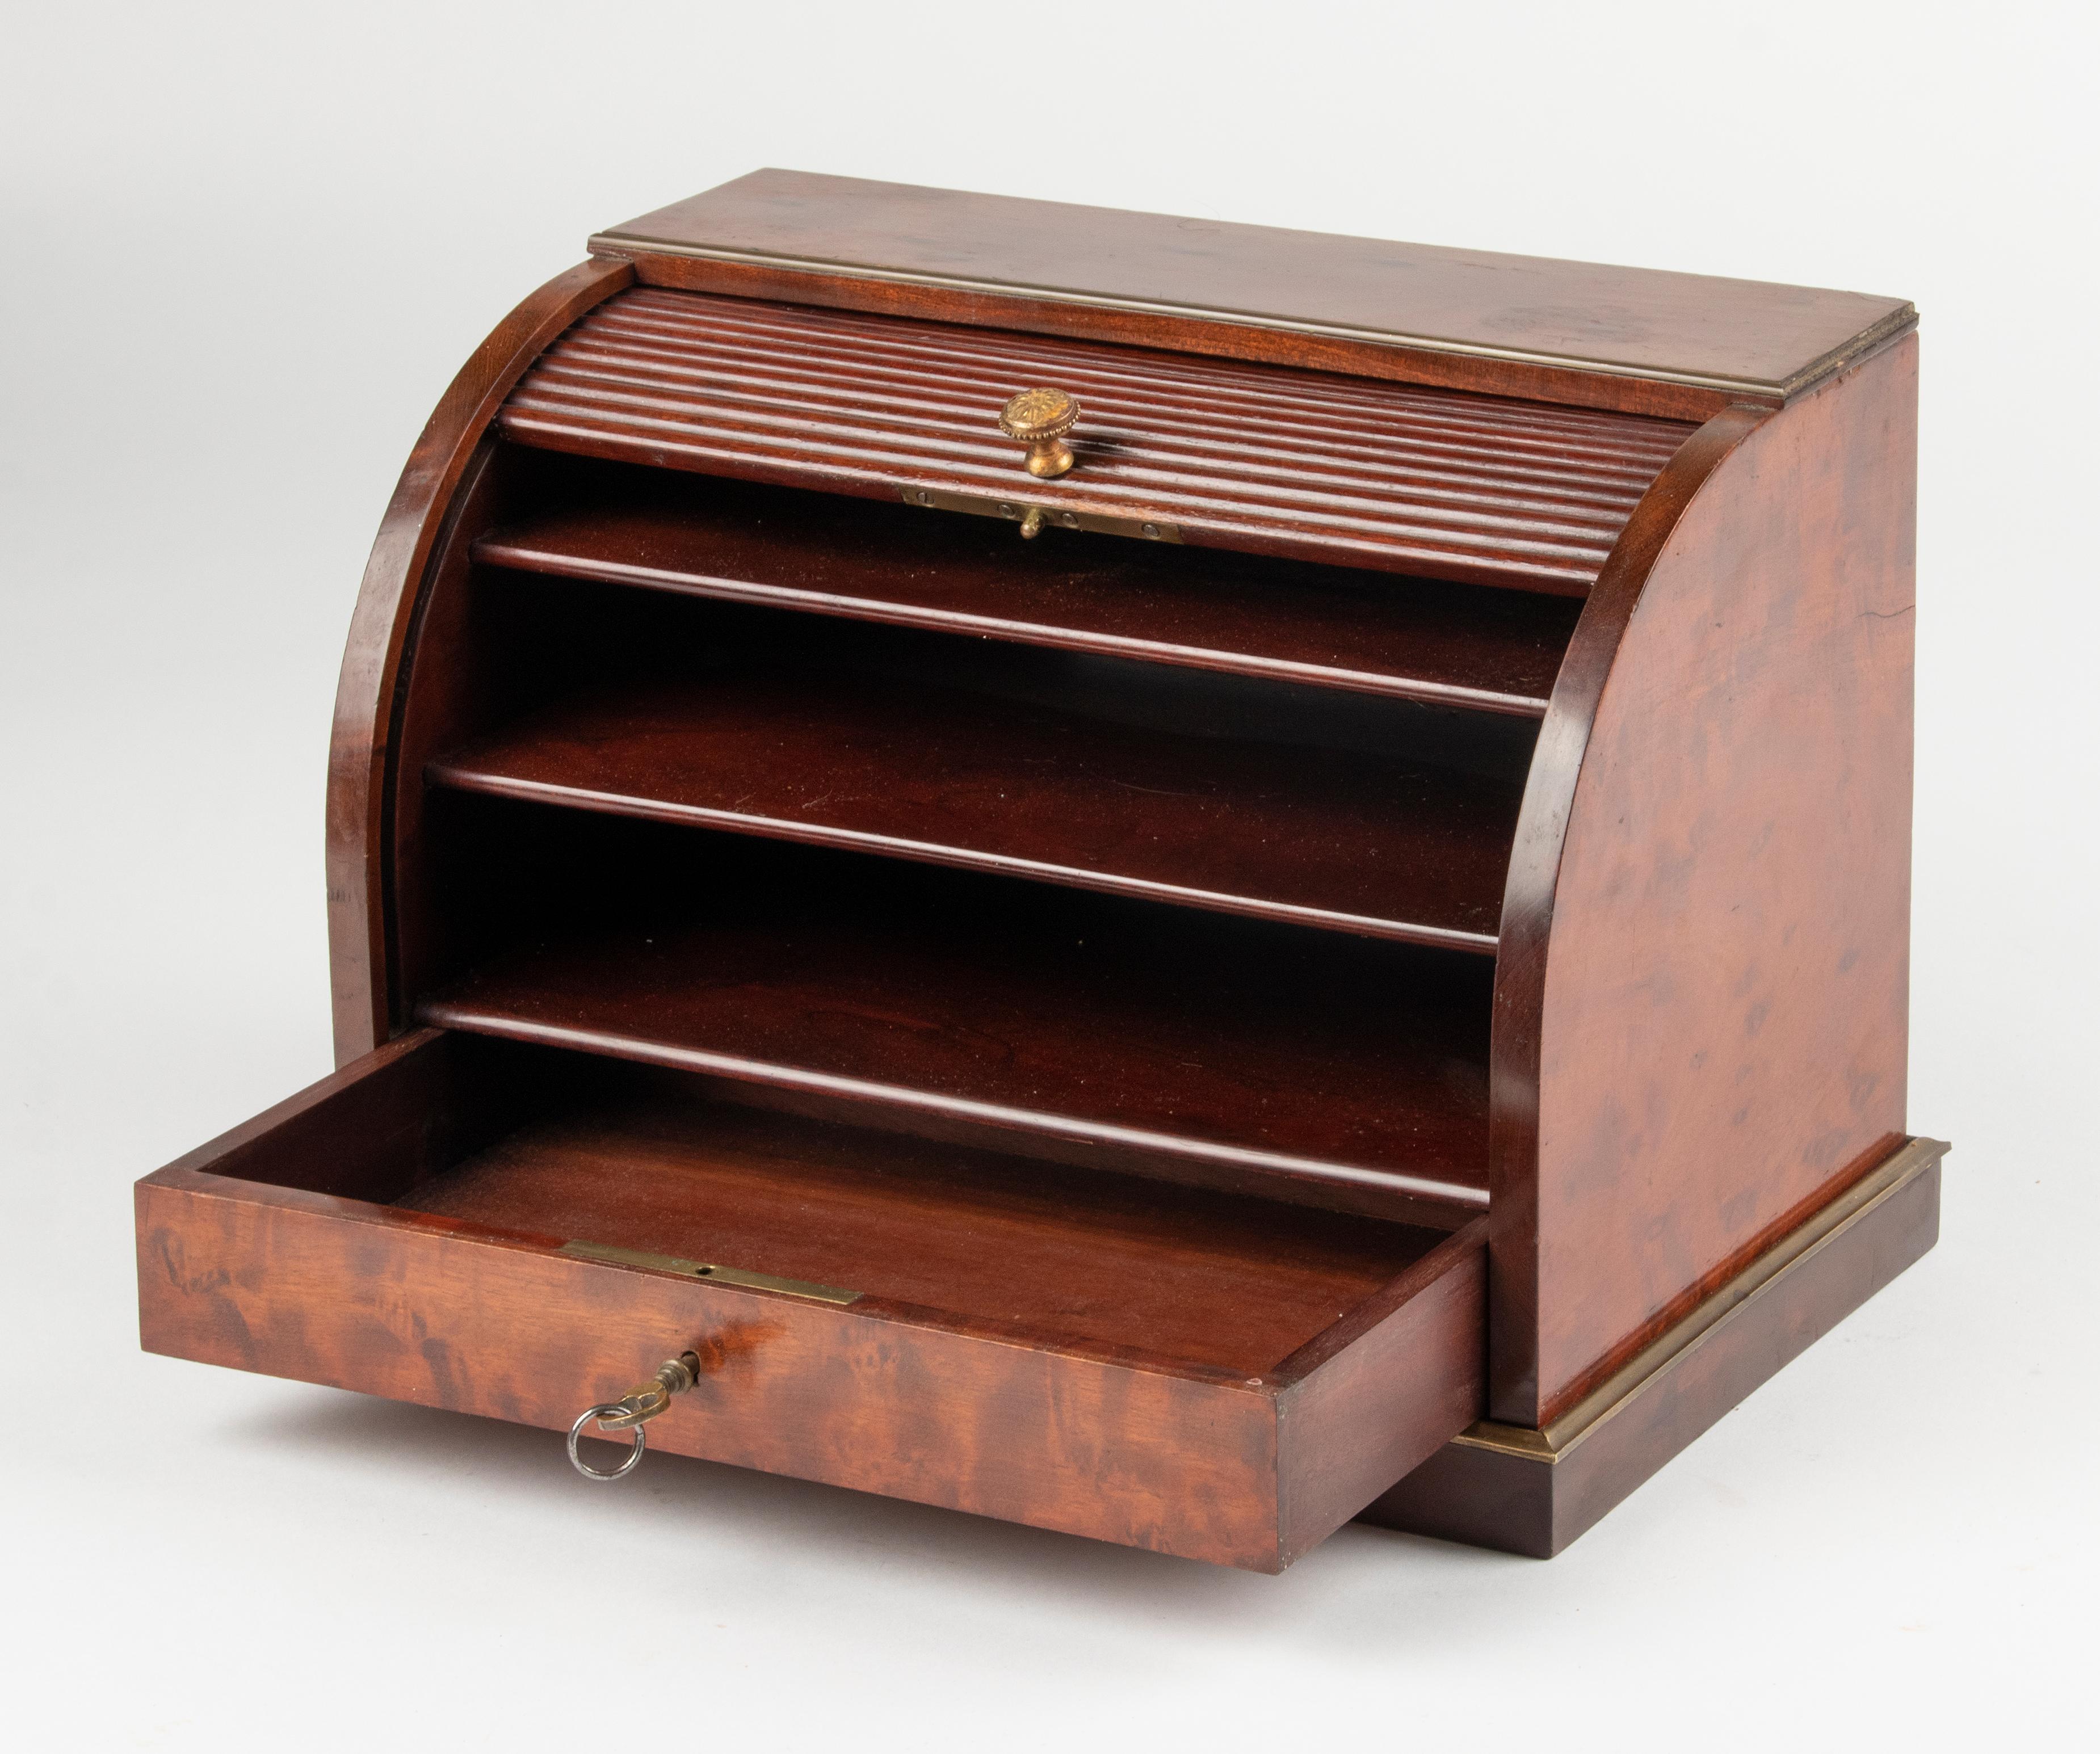 Beautiful antique box for letters / documents with a roller shutter door. The box is made of mahogany wood and above the foot is a bronze profiled frame. The box is in good condition, with working lock and original key.